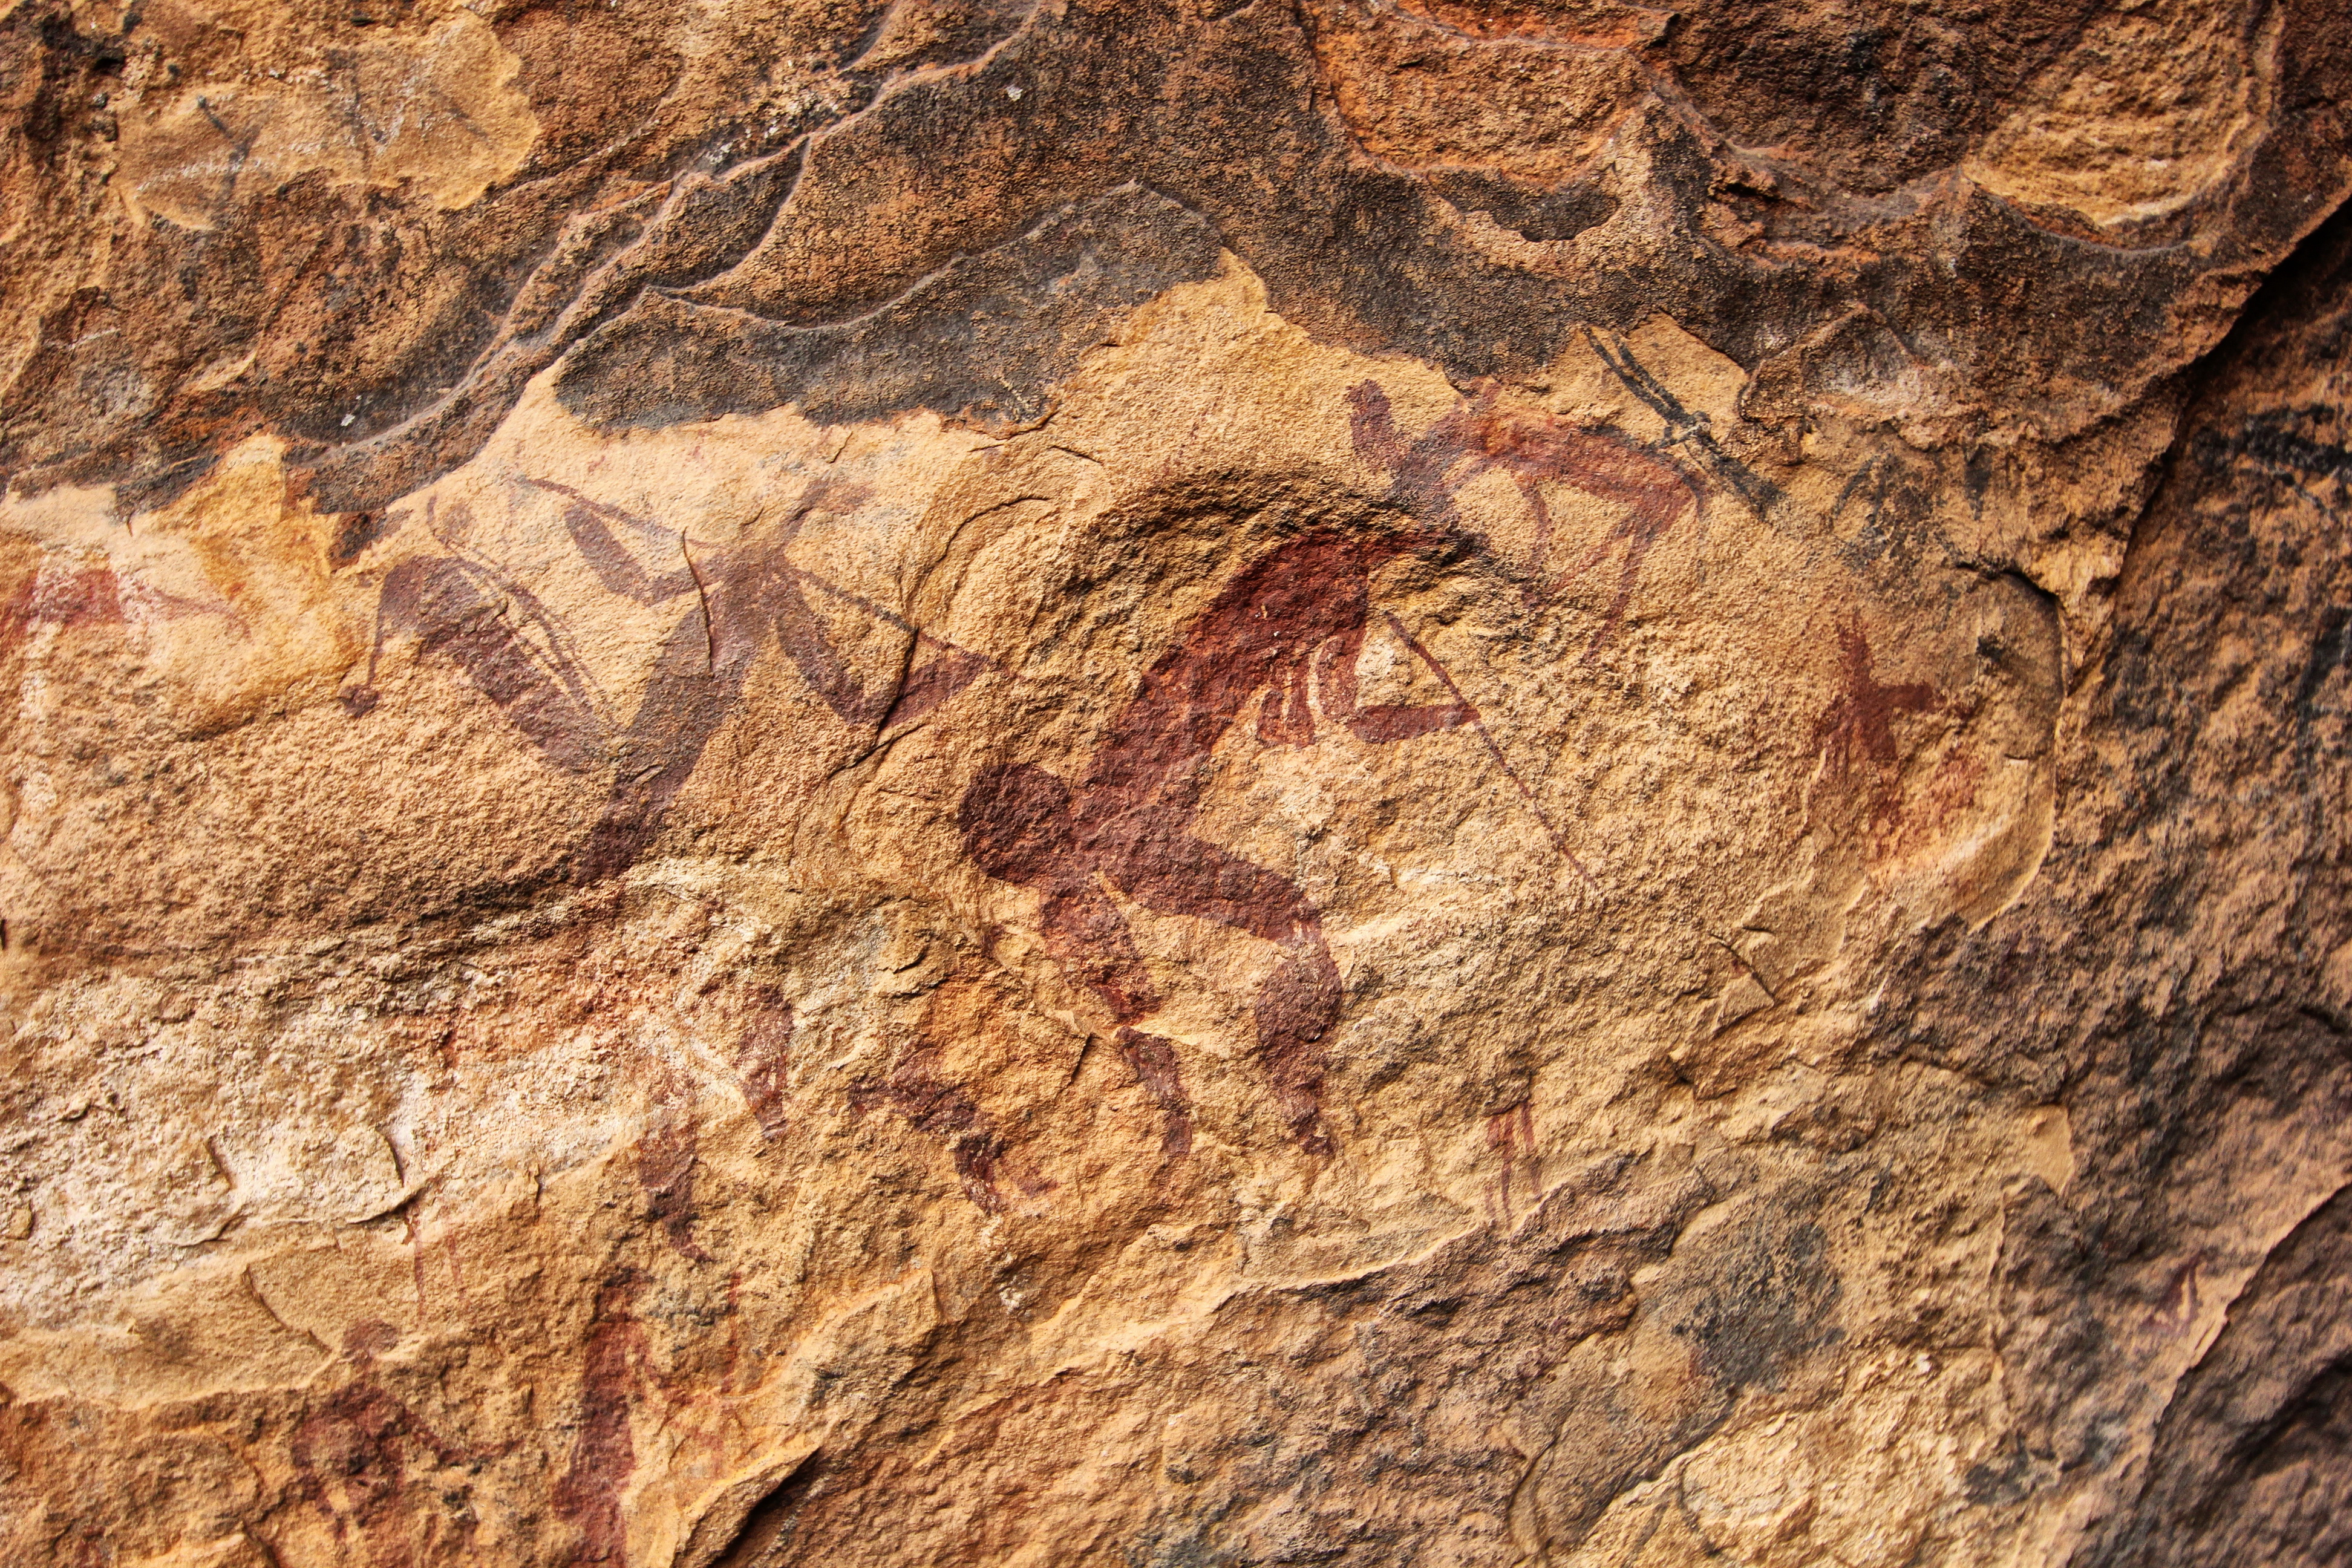  Whether depicting a hunt or a spiritual ceremony, this tableau segment in a southern Drakensberg cave is ancient art at its finest. Image: Chris Marais